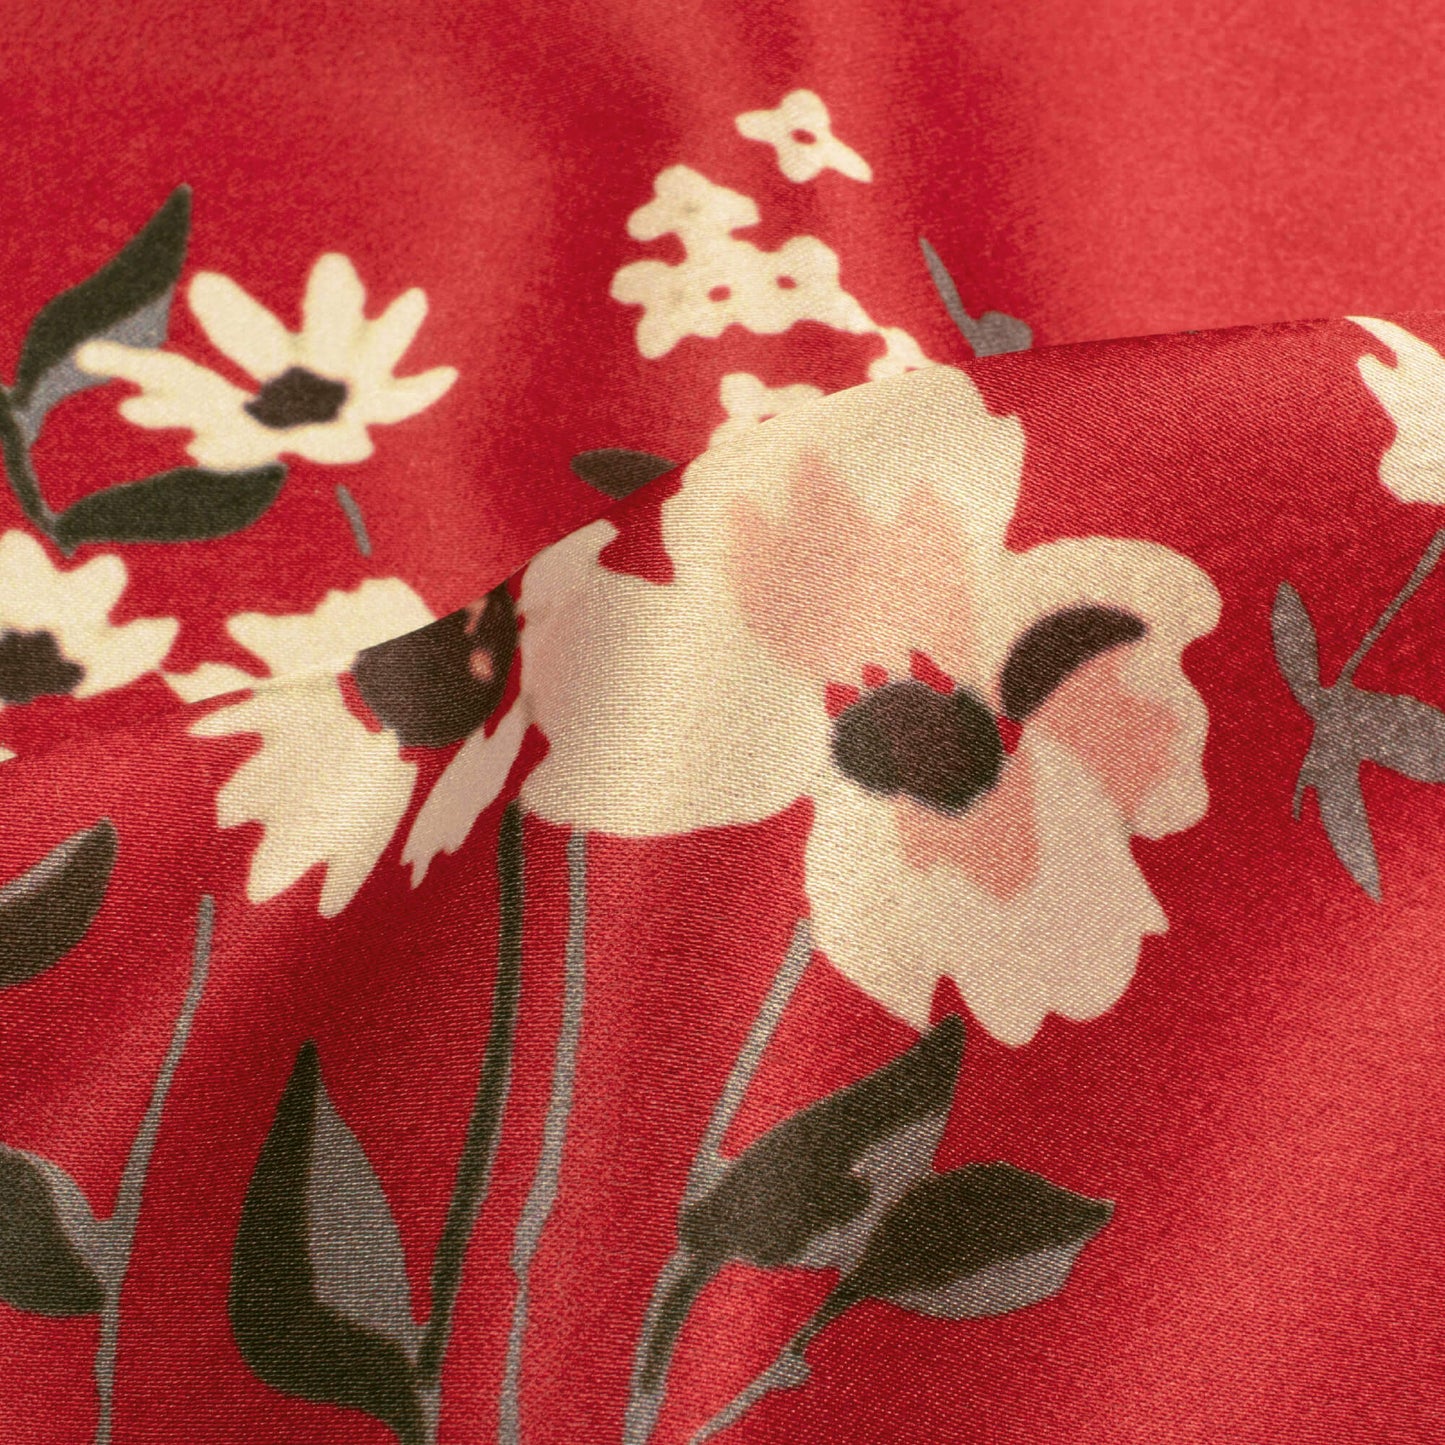 Vermilion Red And Cream Floral Pattern Digital Print Japan Satin Fabric